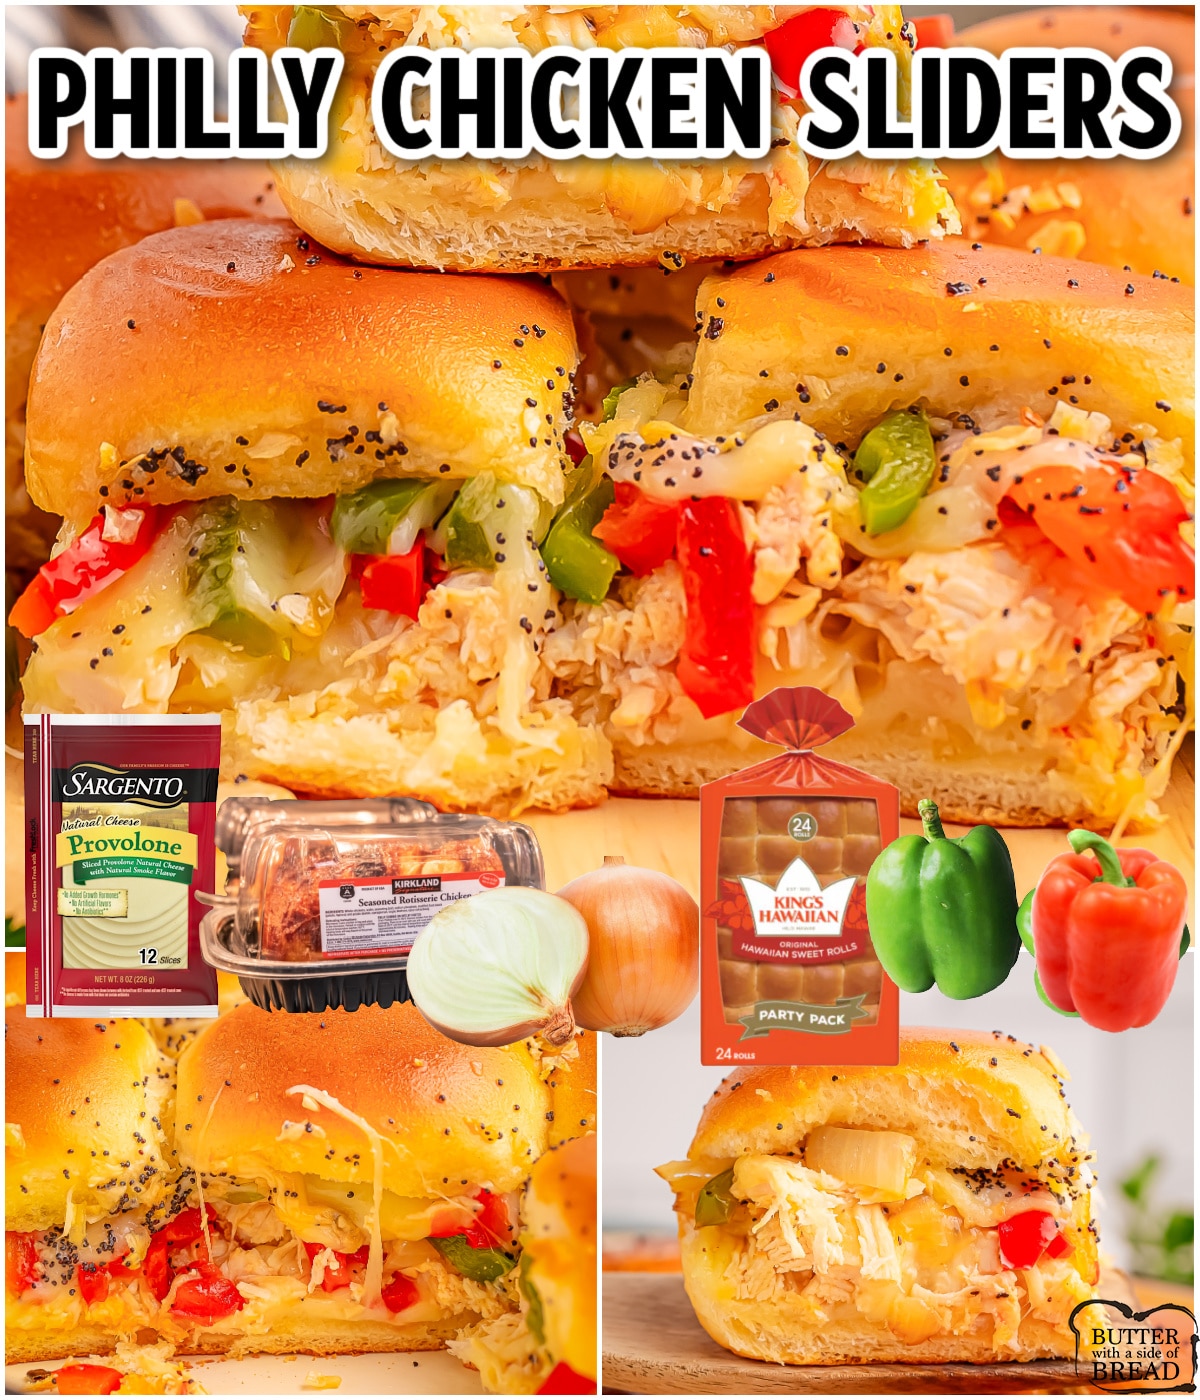 Philly Chicken Sliders made with shredded chicken, sautéed bell peppers, onions, and provolone cheese for a simple weeknight meal full of flavor!